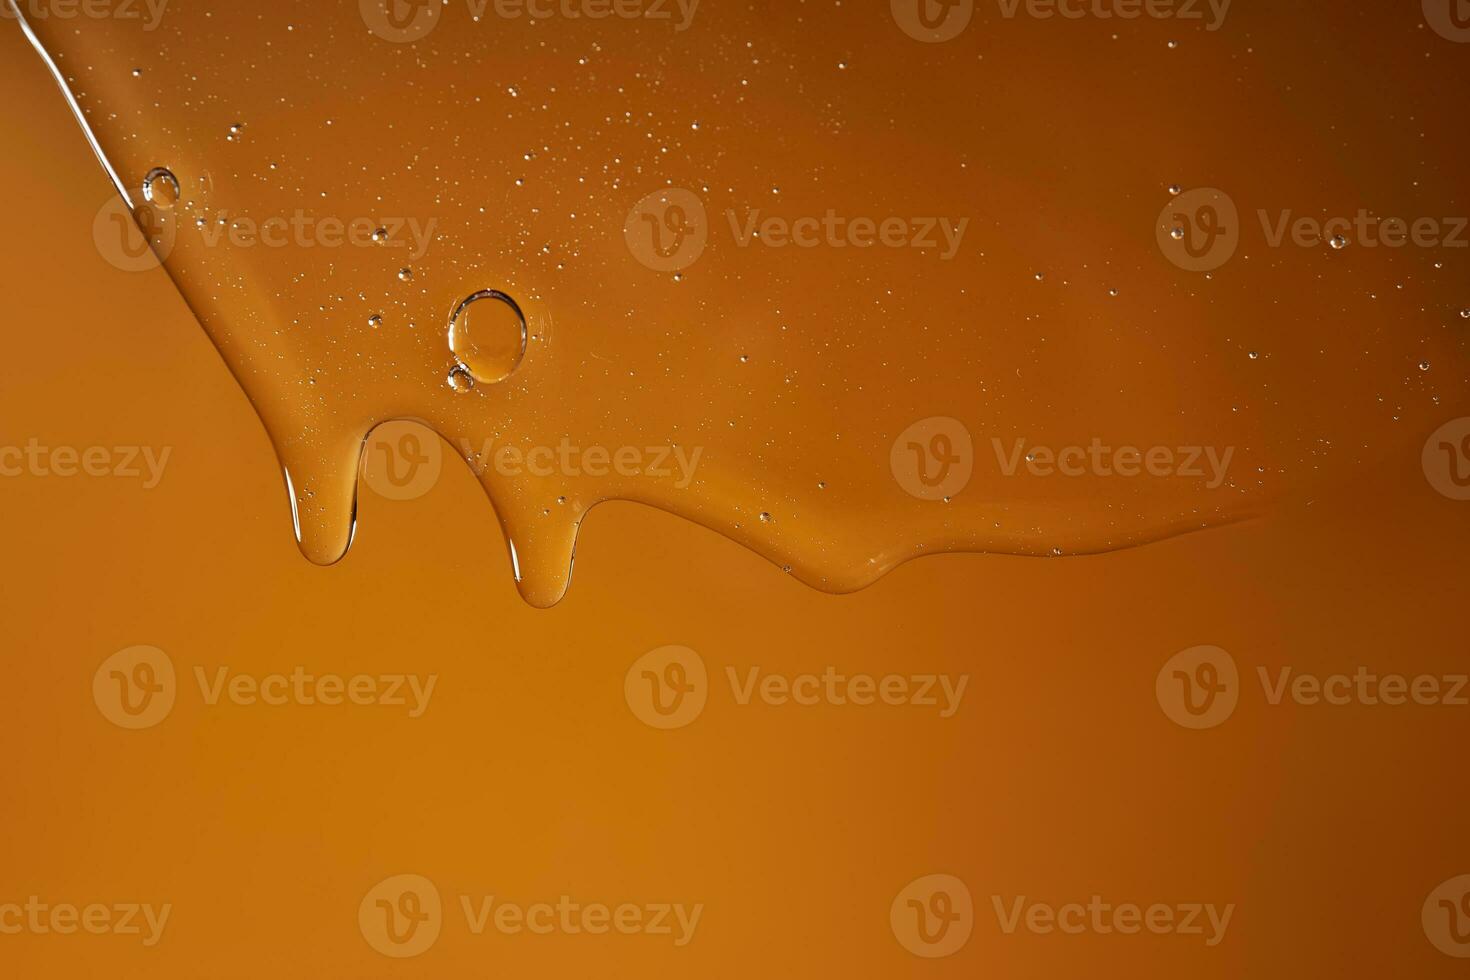 A drop of body gel or shampoo flowing down on a yellow saturated background. Texture. photo